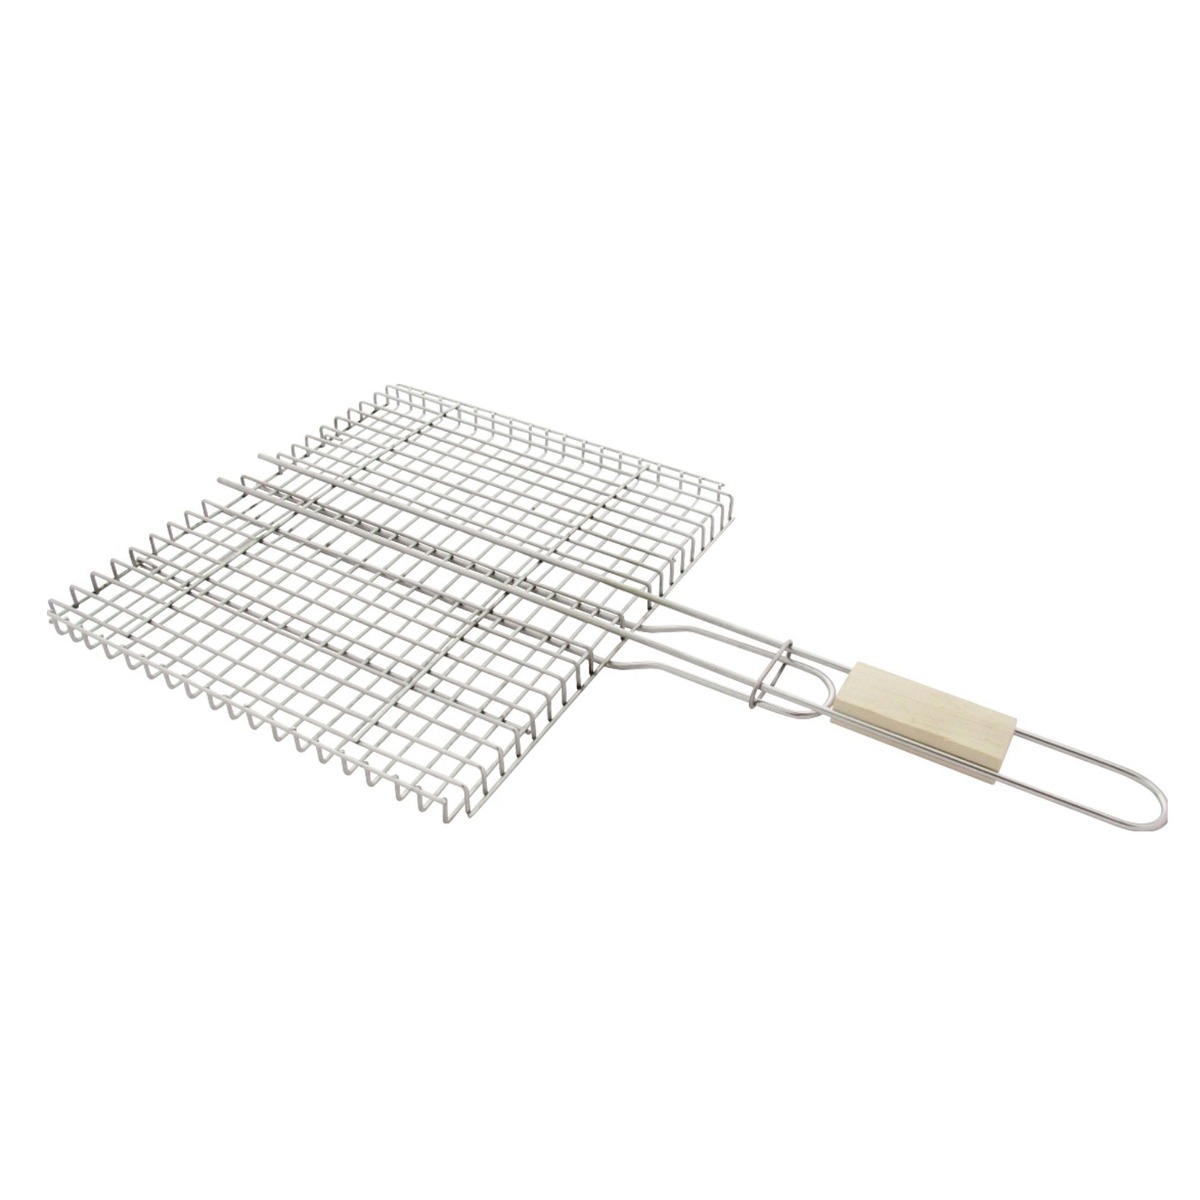 Stainless-Steel Grill Basket (38.5 x 31.5 cm)